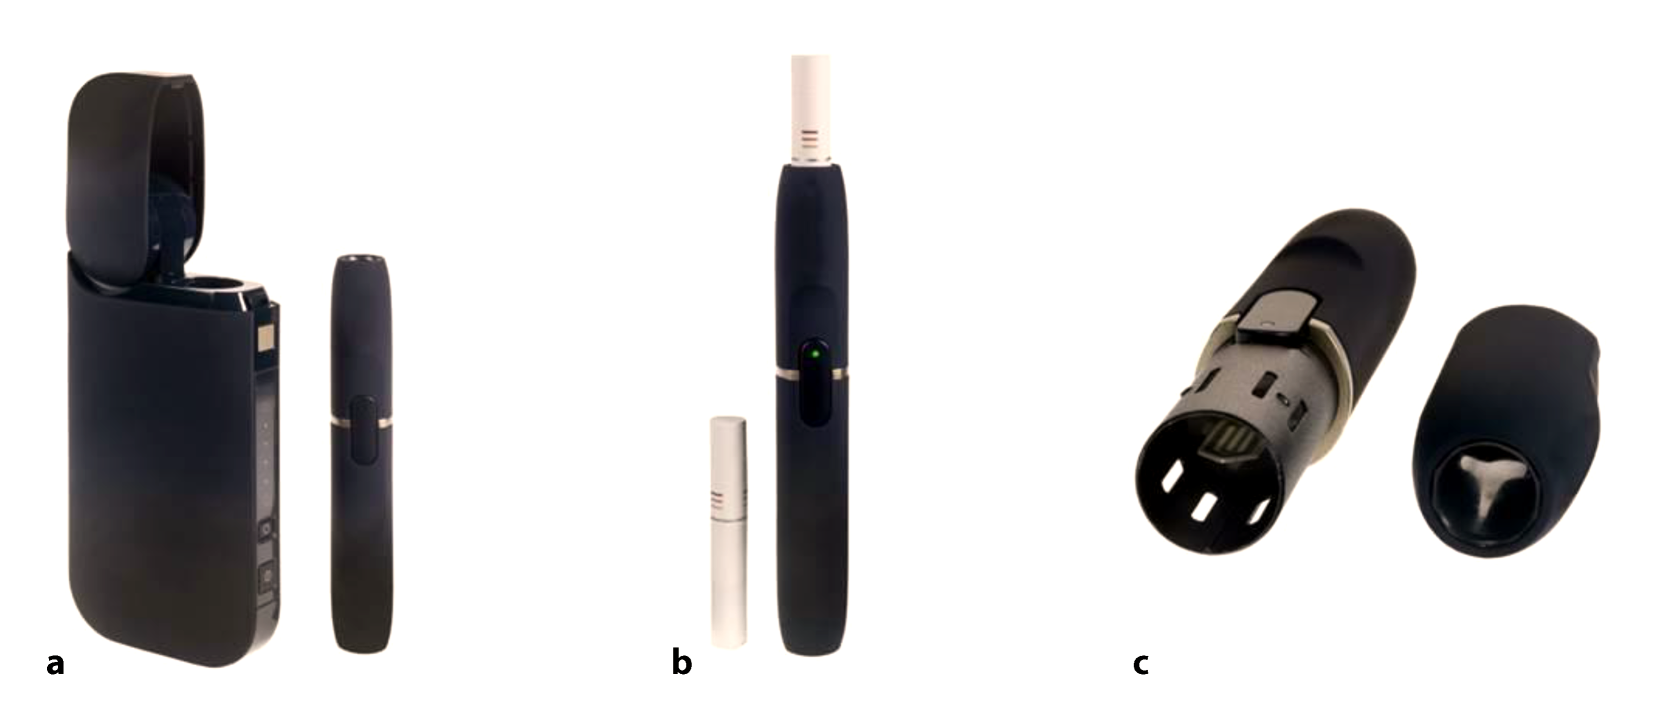 FDA Authorizes Sale of the IQOS 3 Tobacco Heating System Device in the  United States